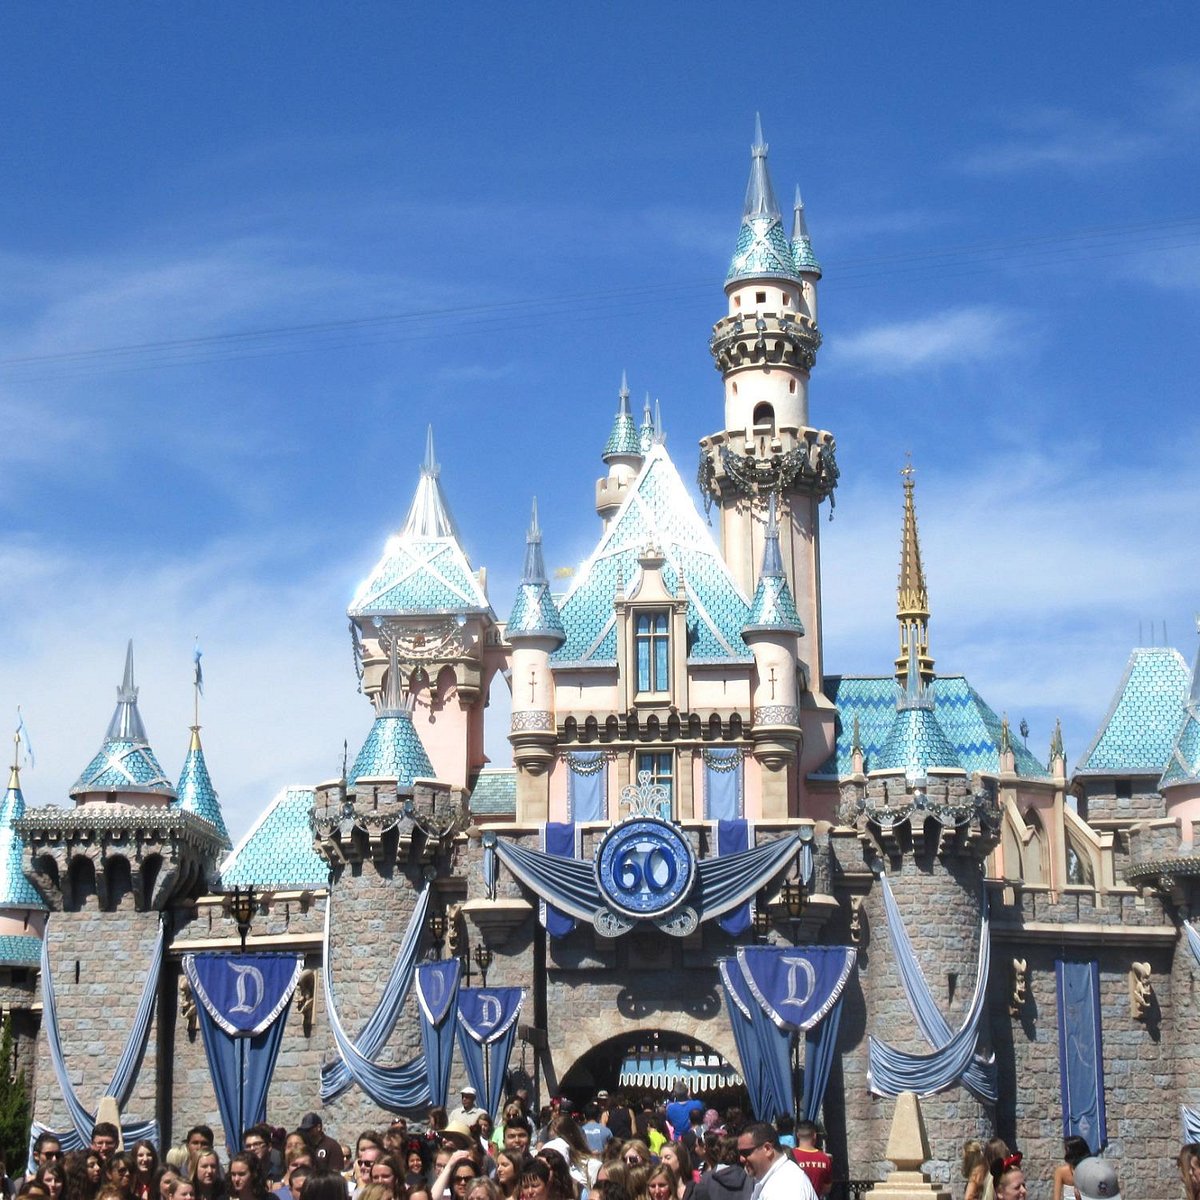 Sleeping Beauty Castle Walkthrough Anaheim All You Need To Know Before You Go